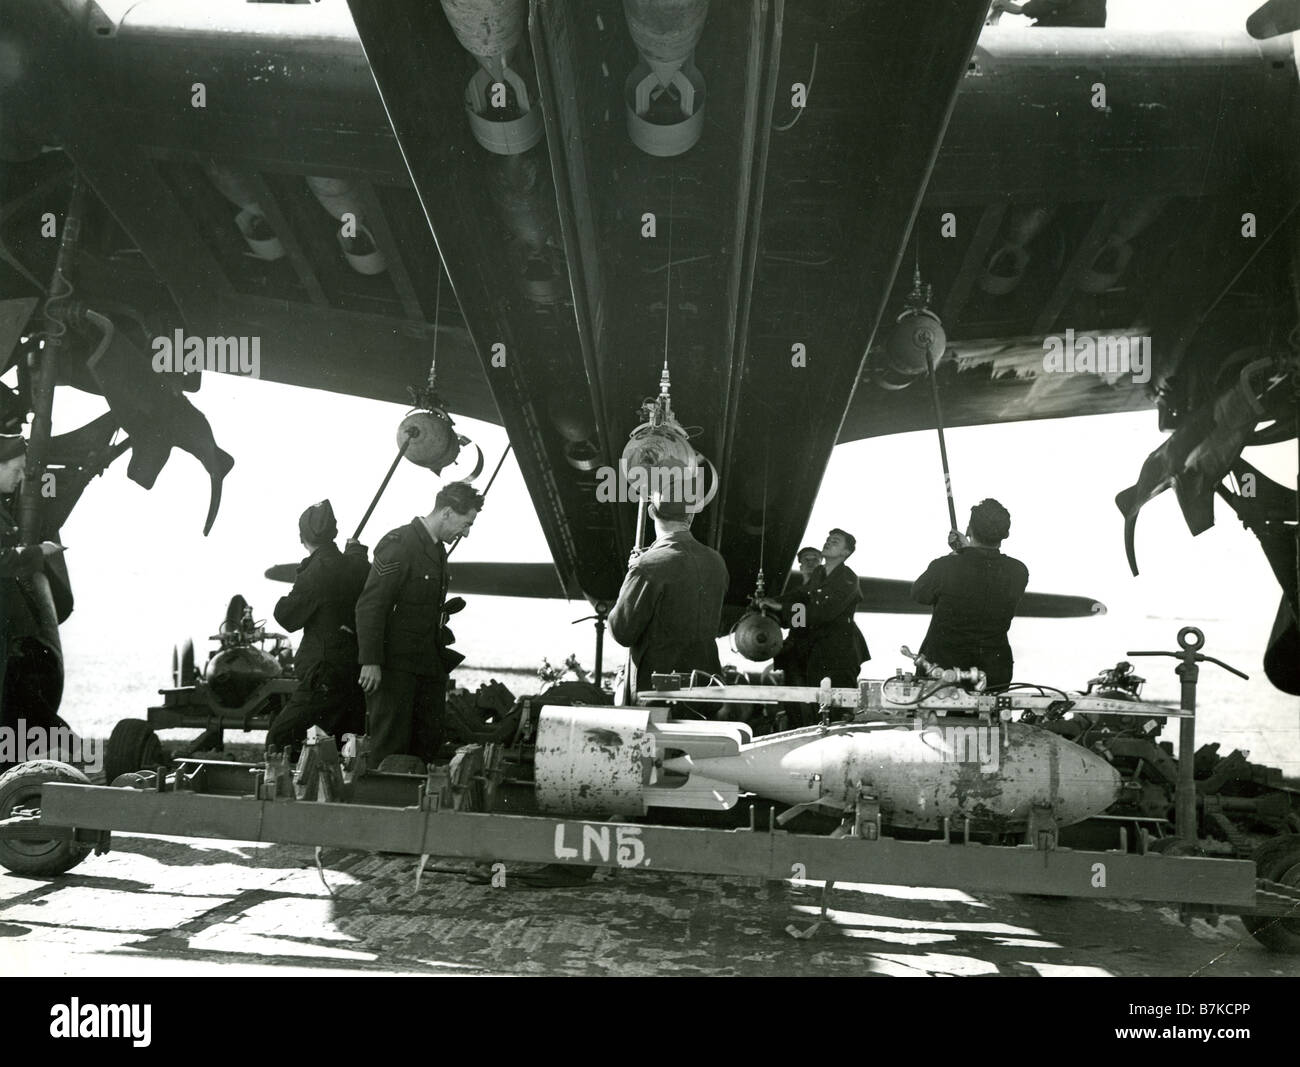 AVRO STIRLING  Loading bombs at an RAF squadron during WW2 Stock Photo